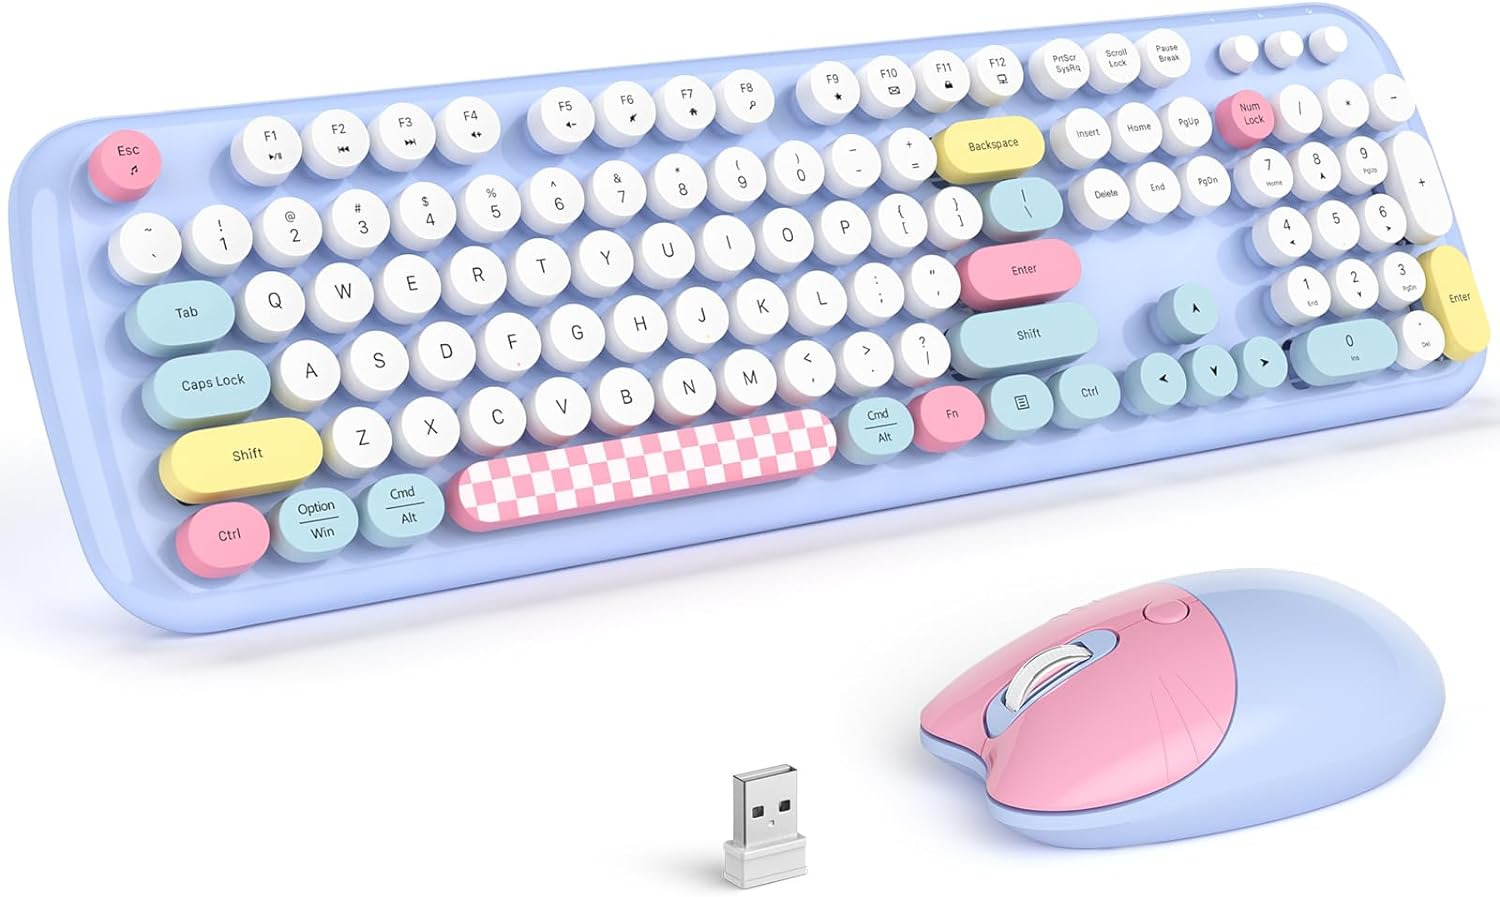 Wireless Keyboard and Mouse, Full Size Typewriter Keyboard and Cute Cat Shape De